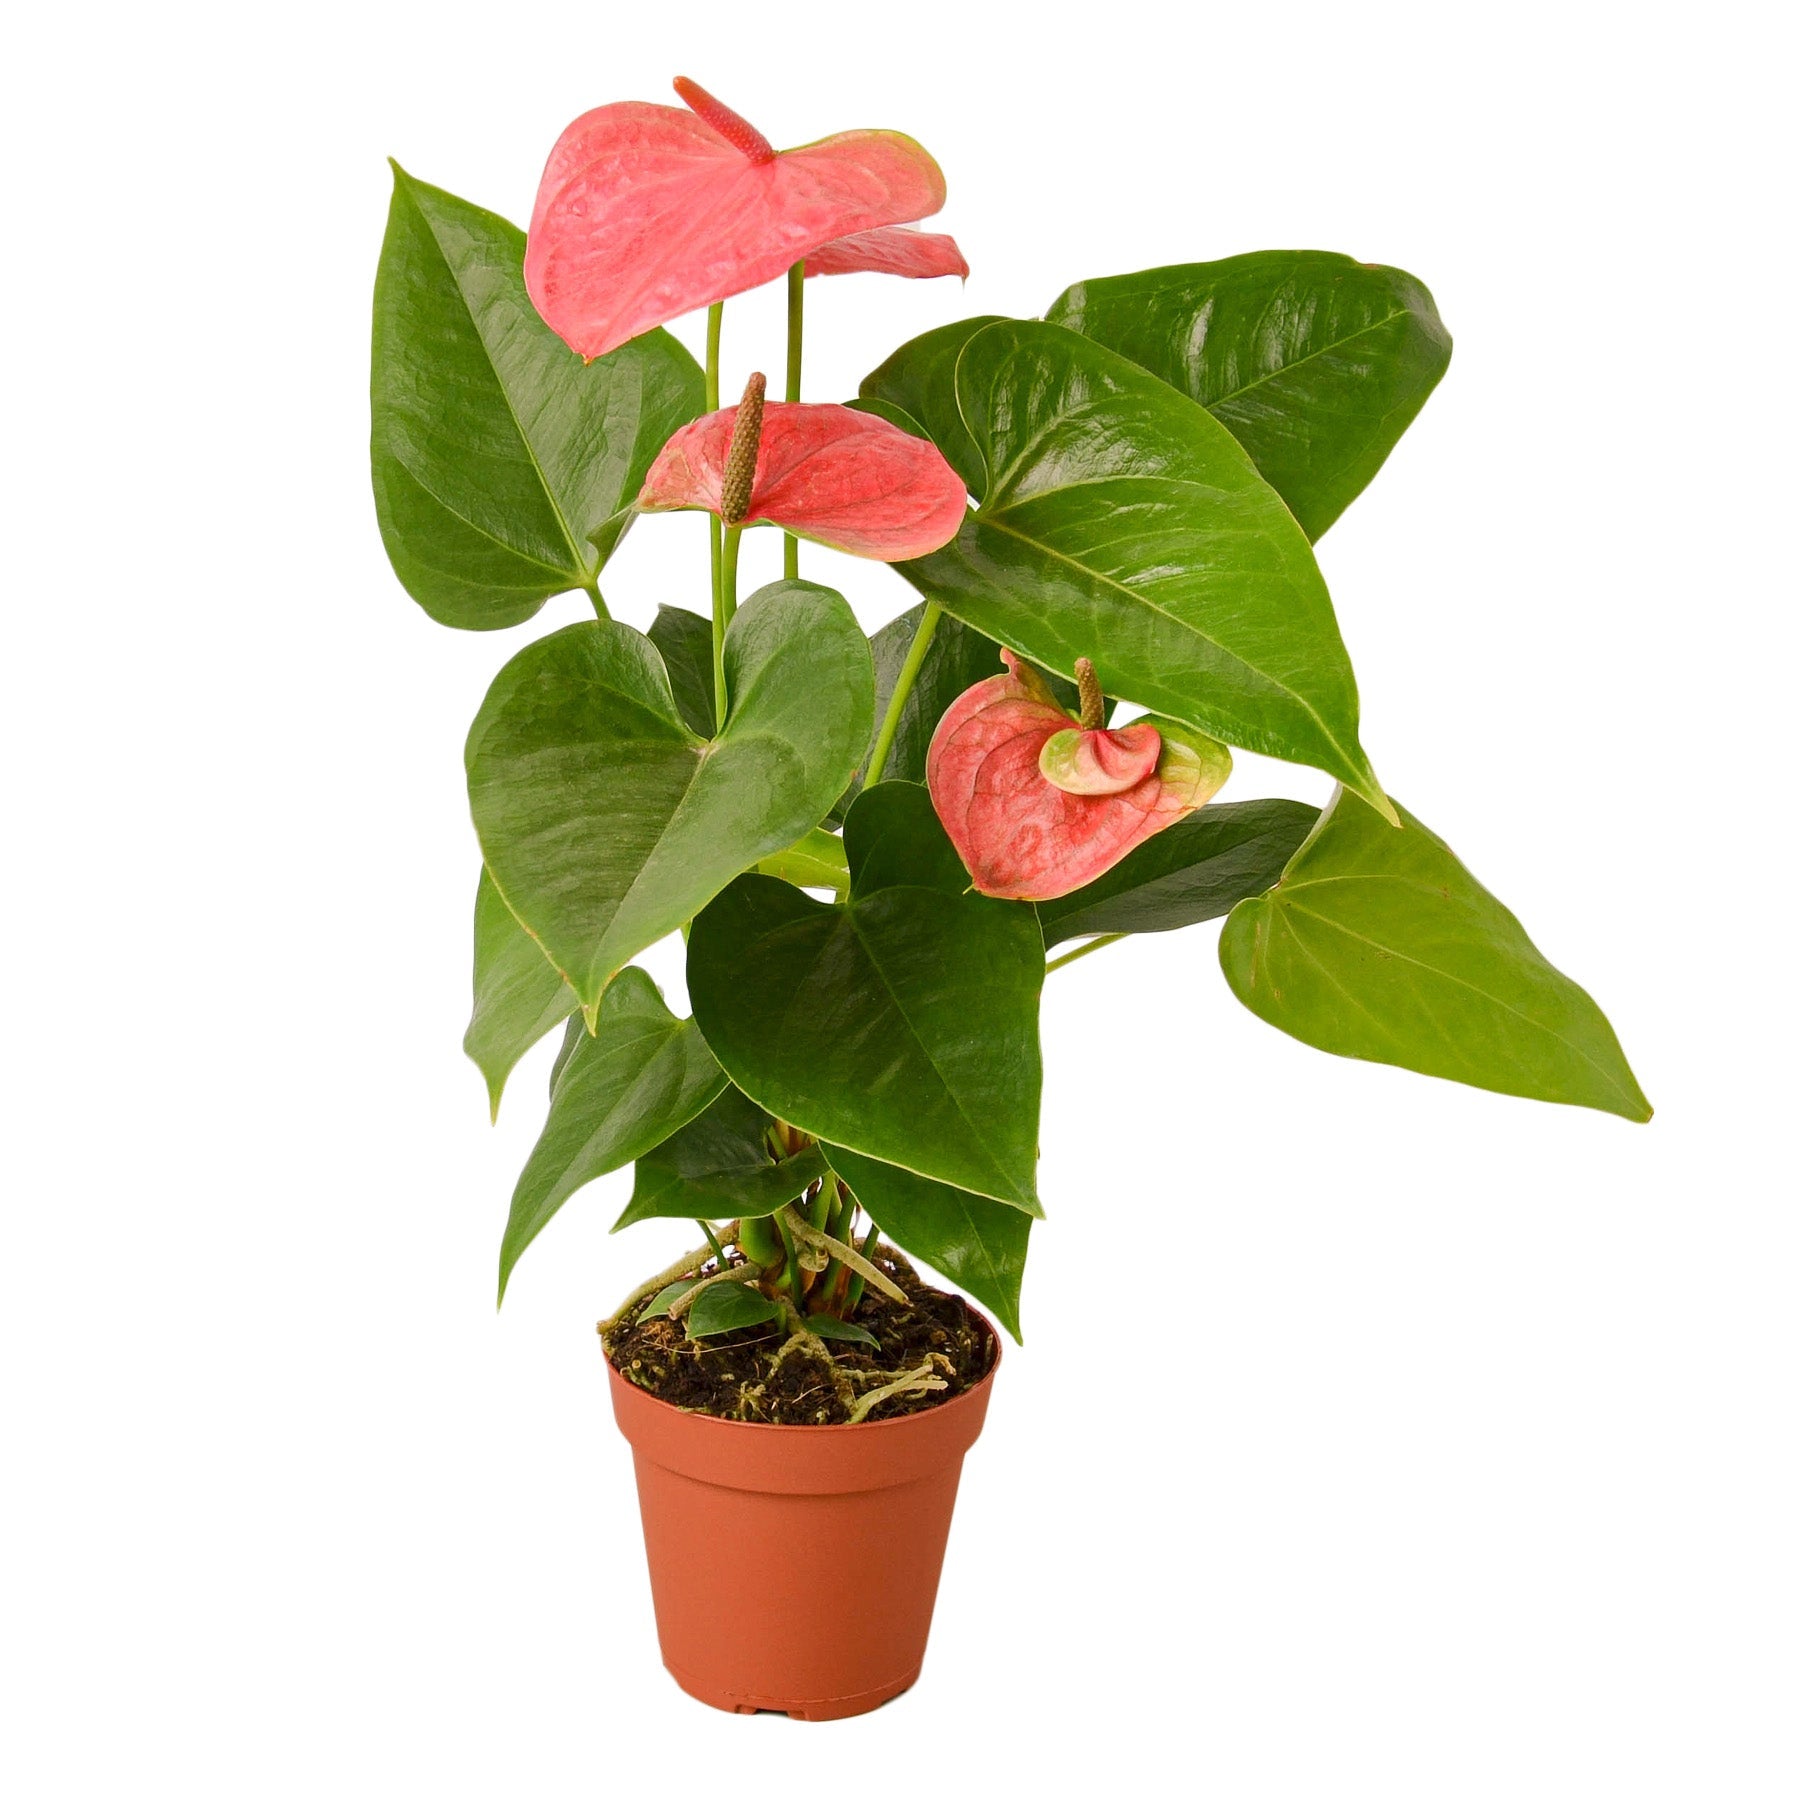 A beautiful pink flower in a pot, set against a serene white background.